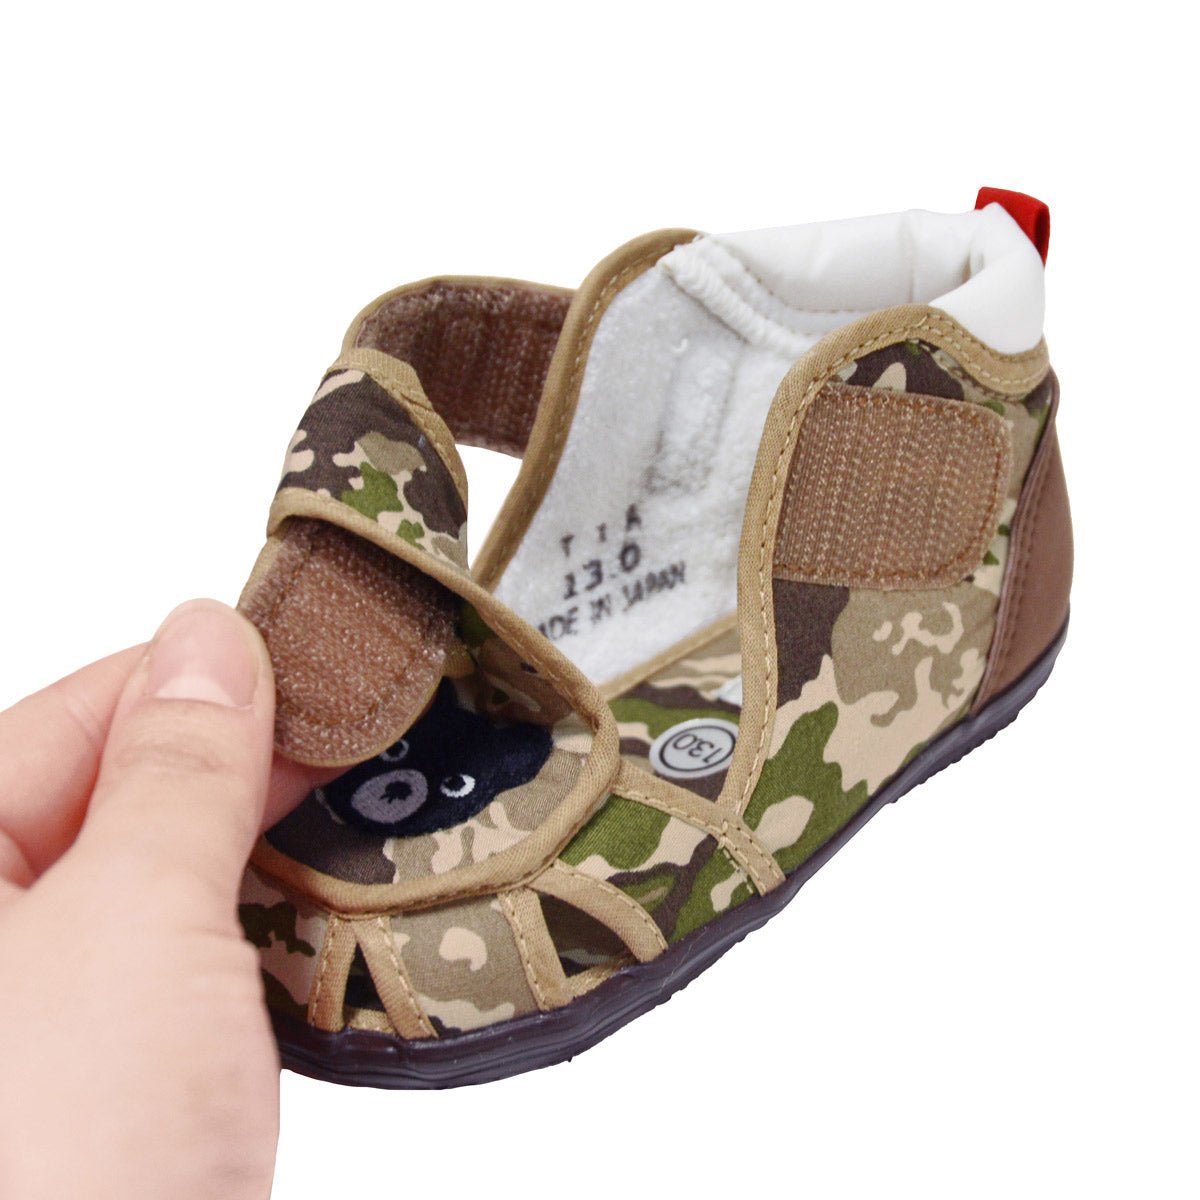 DOUBLE_B Closed Toe Camouflage Sandals - 62-9301-388-09-13